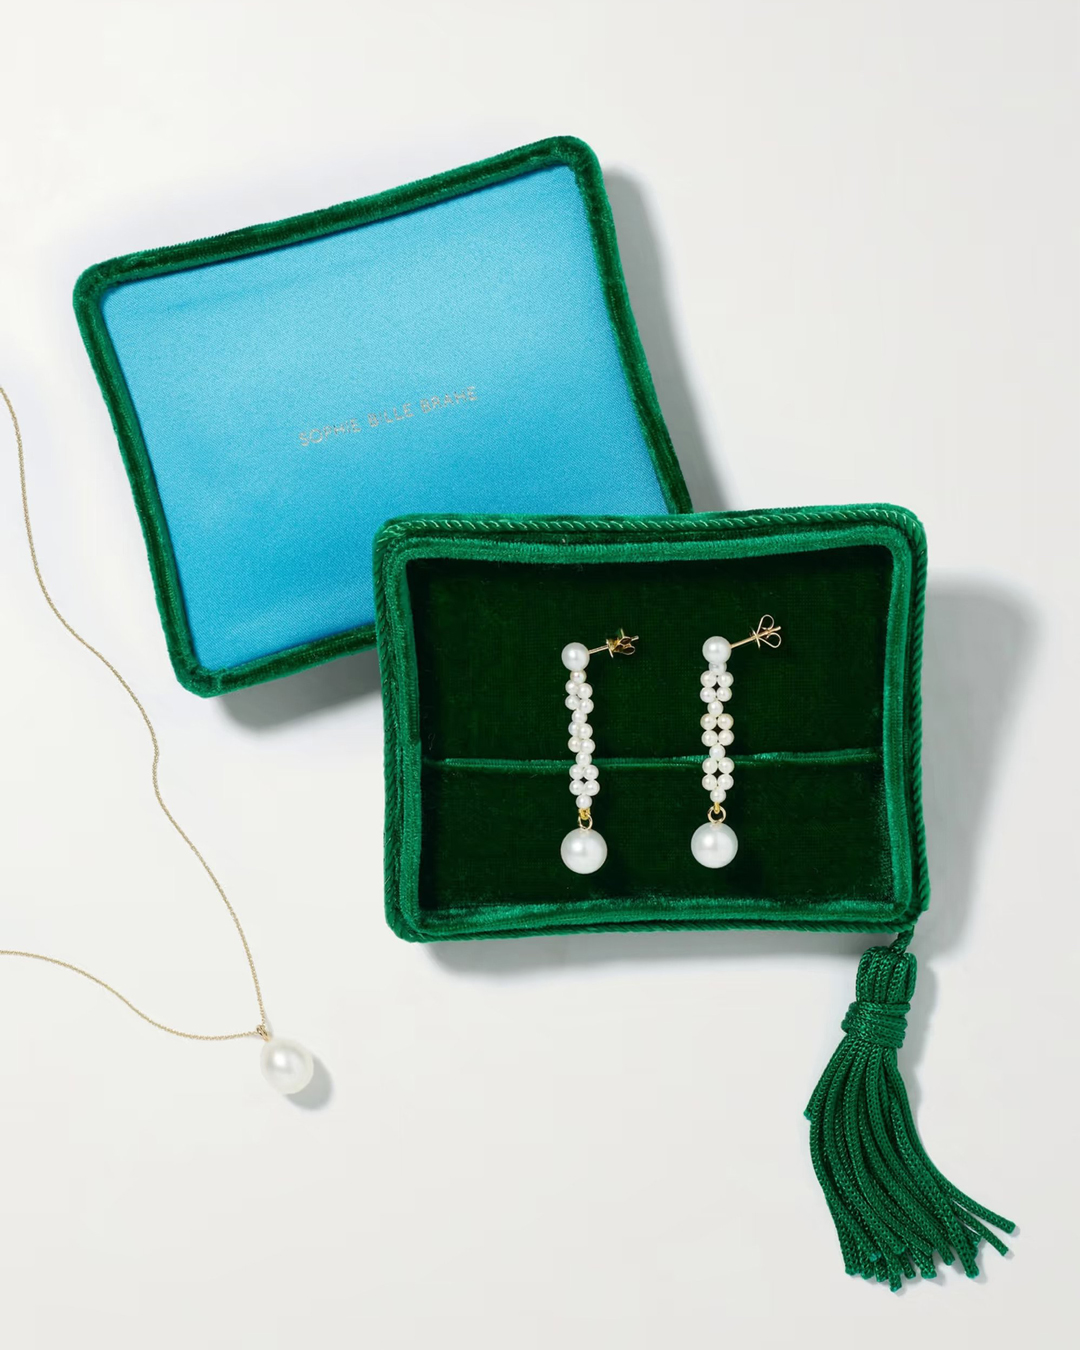 A green and blue velvet jewellery box with pearl earrings and a necklace.